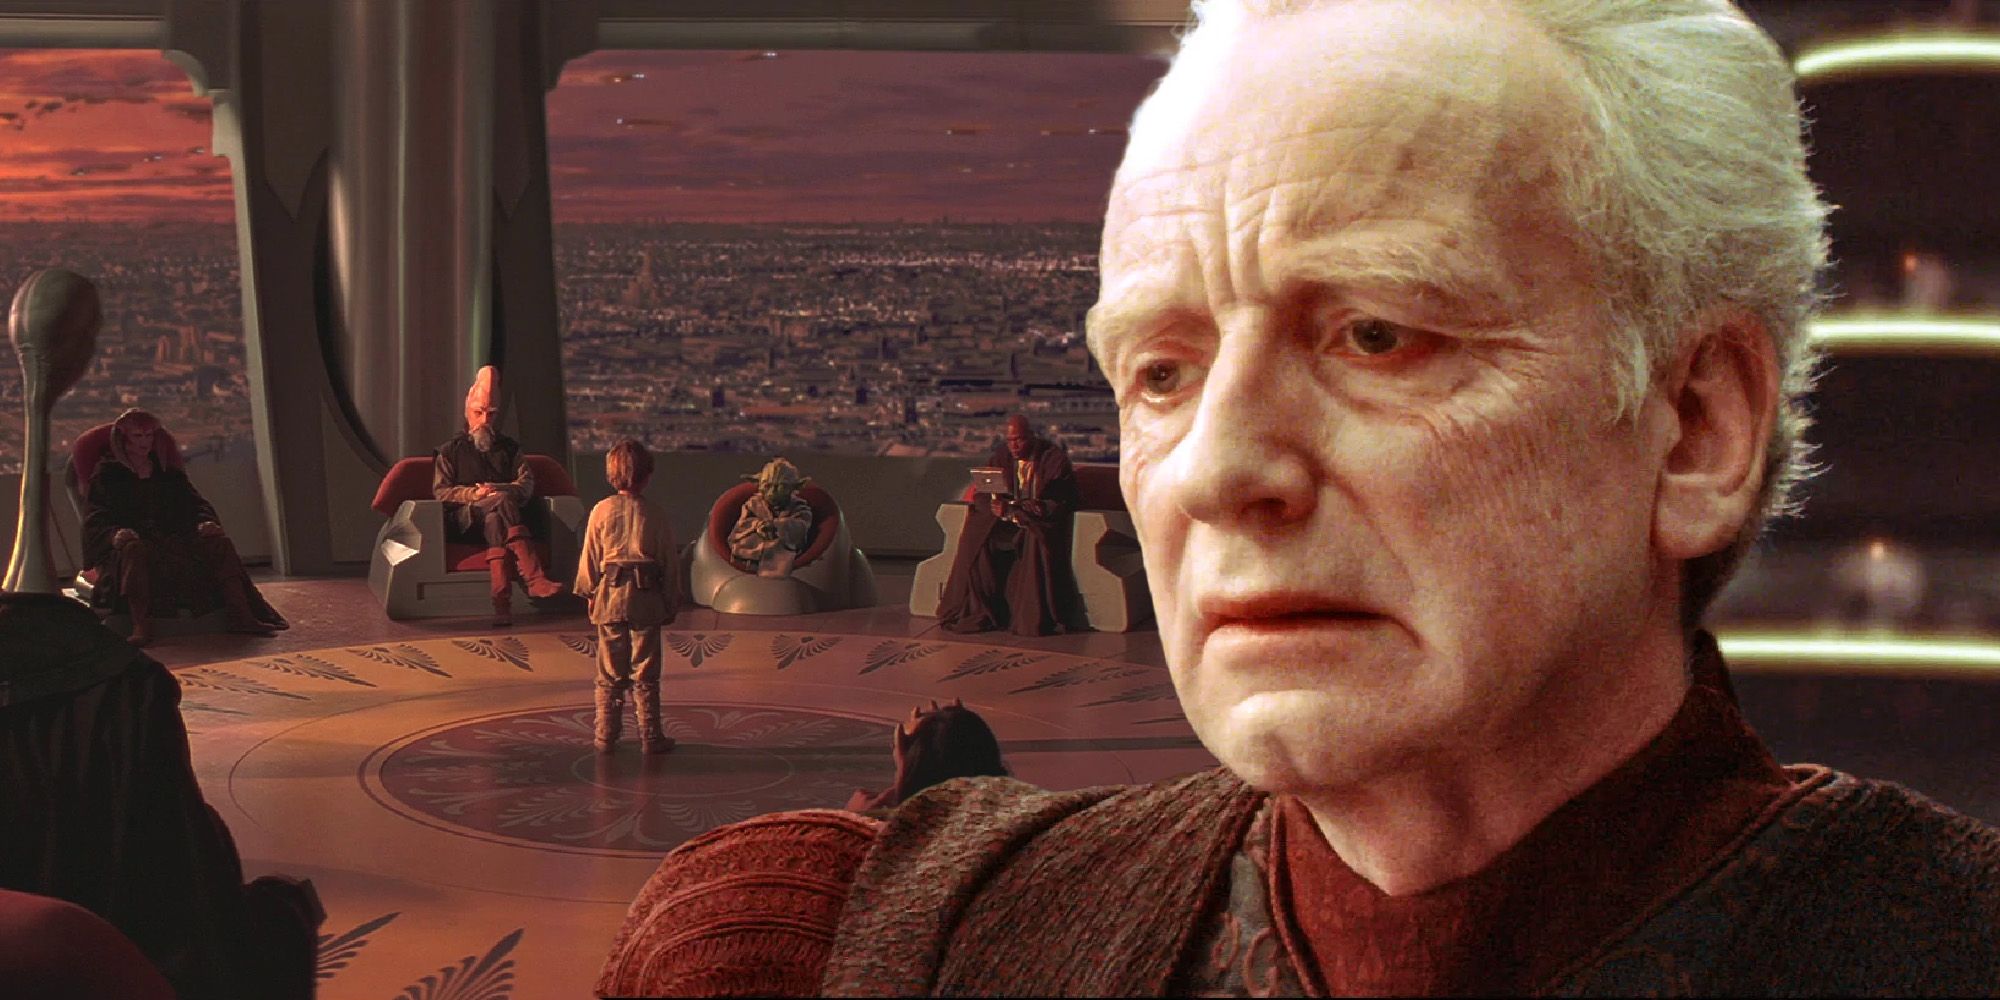 Chancellor Palpatine and the Jedi Council in Star Wars: The Phantom Menace.